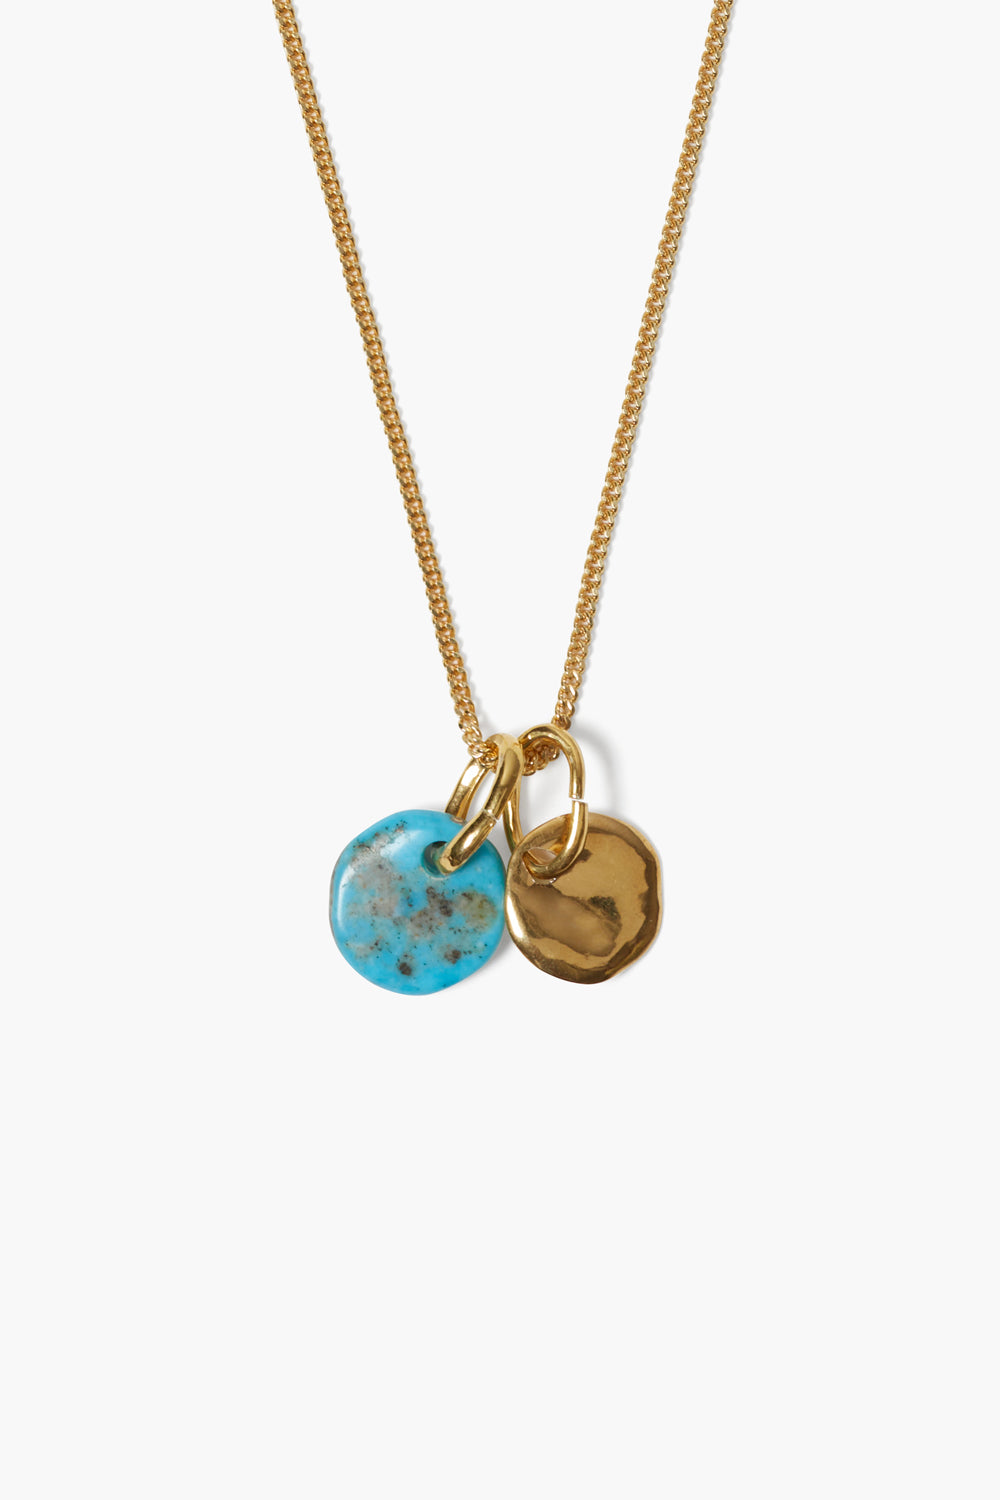 CHAN LUU CHARM NECKLACE GOLD TURQUOISE